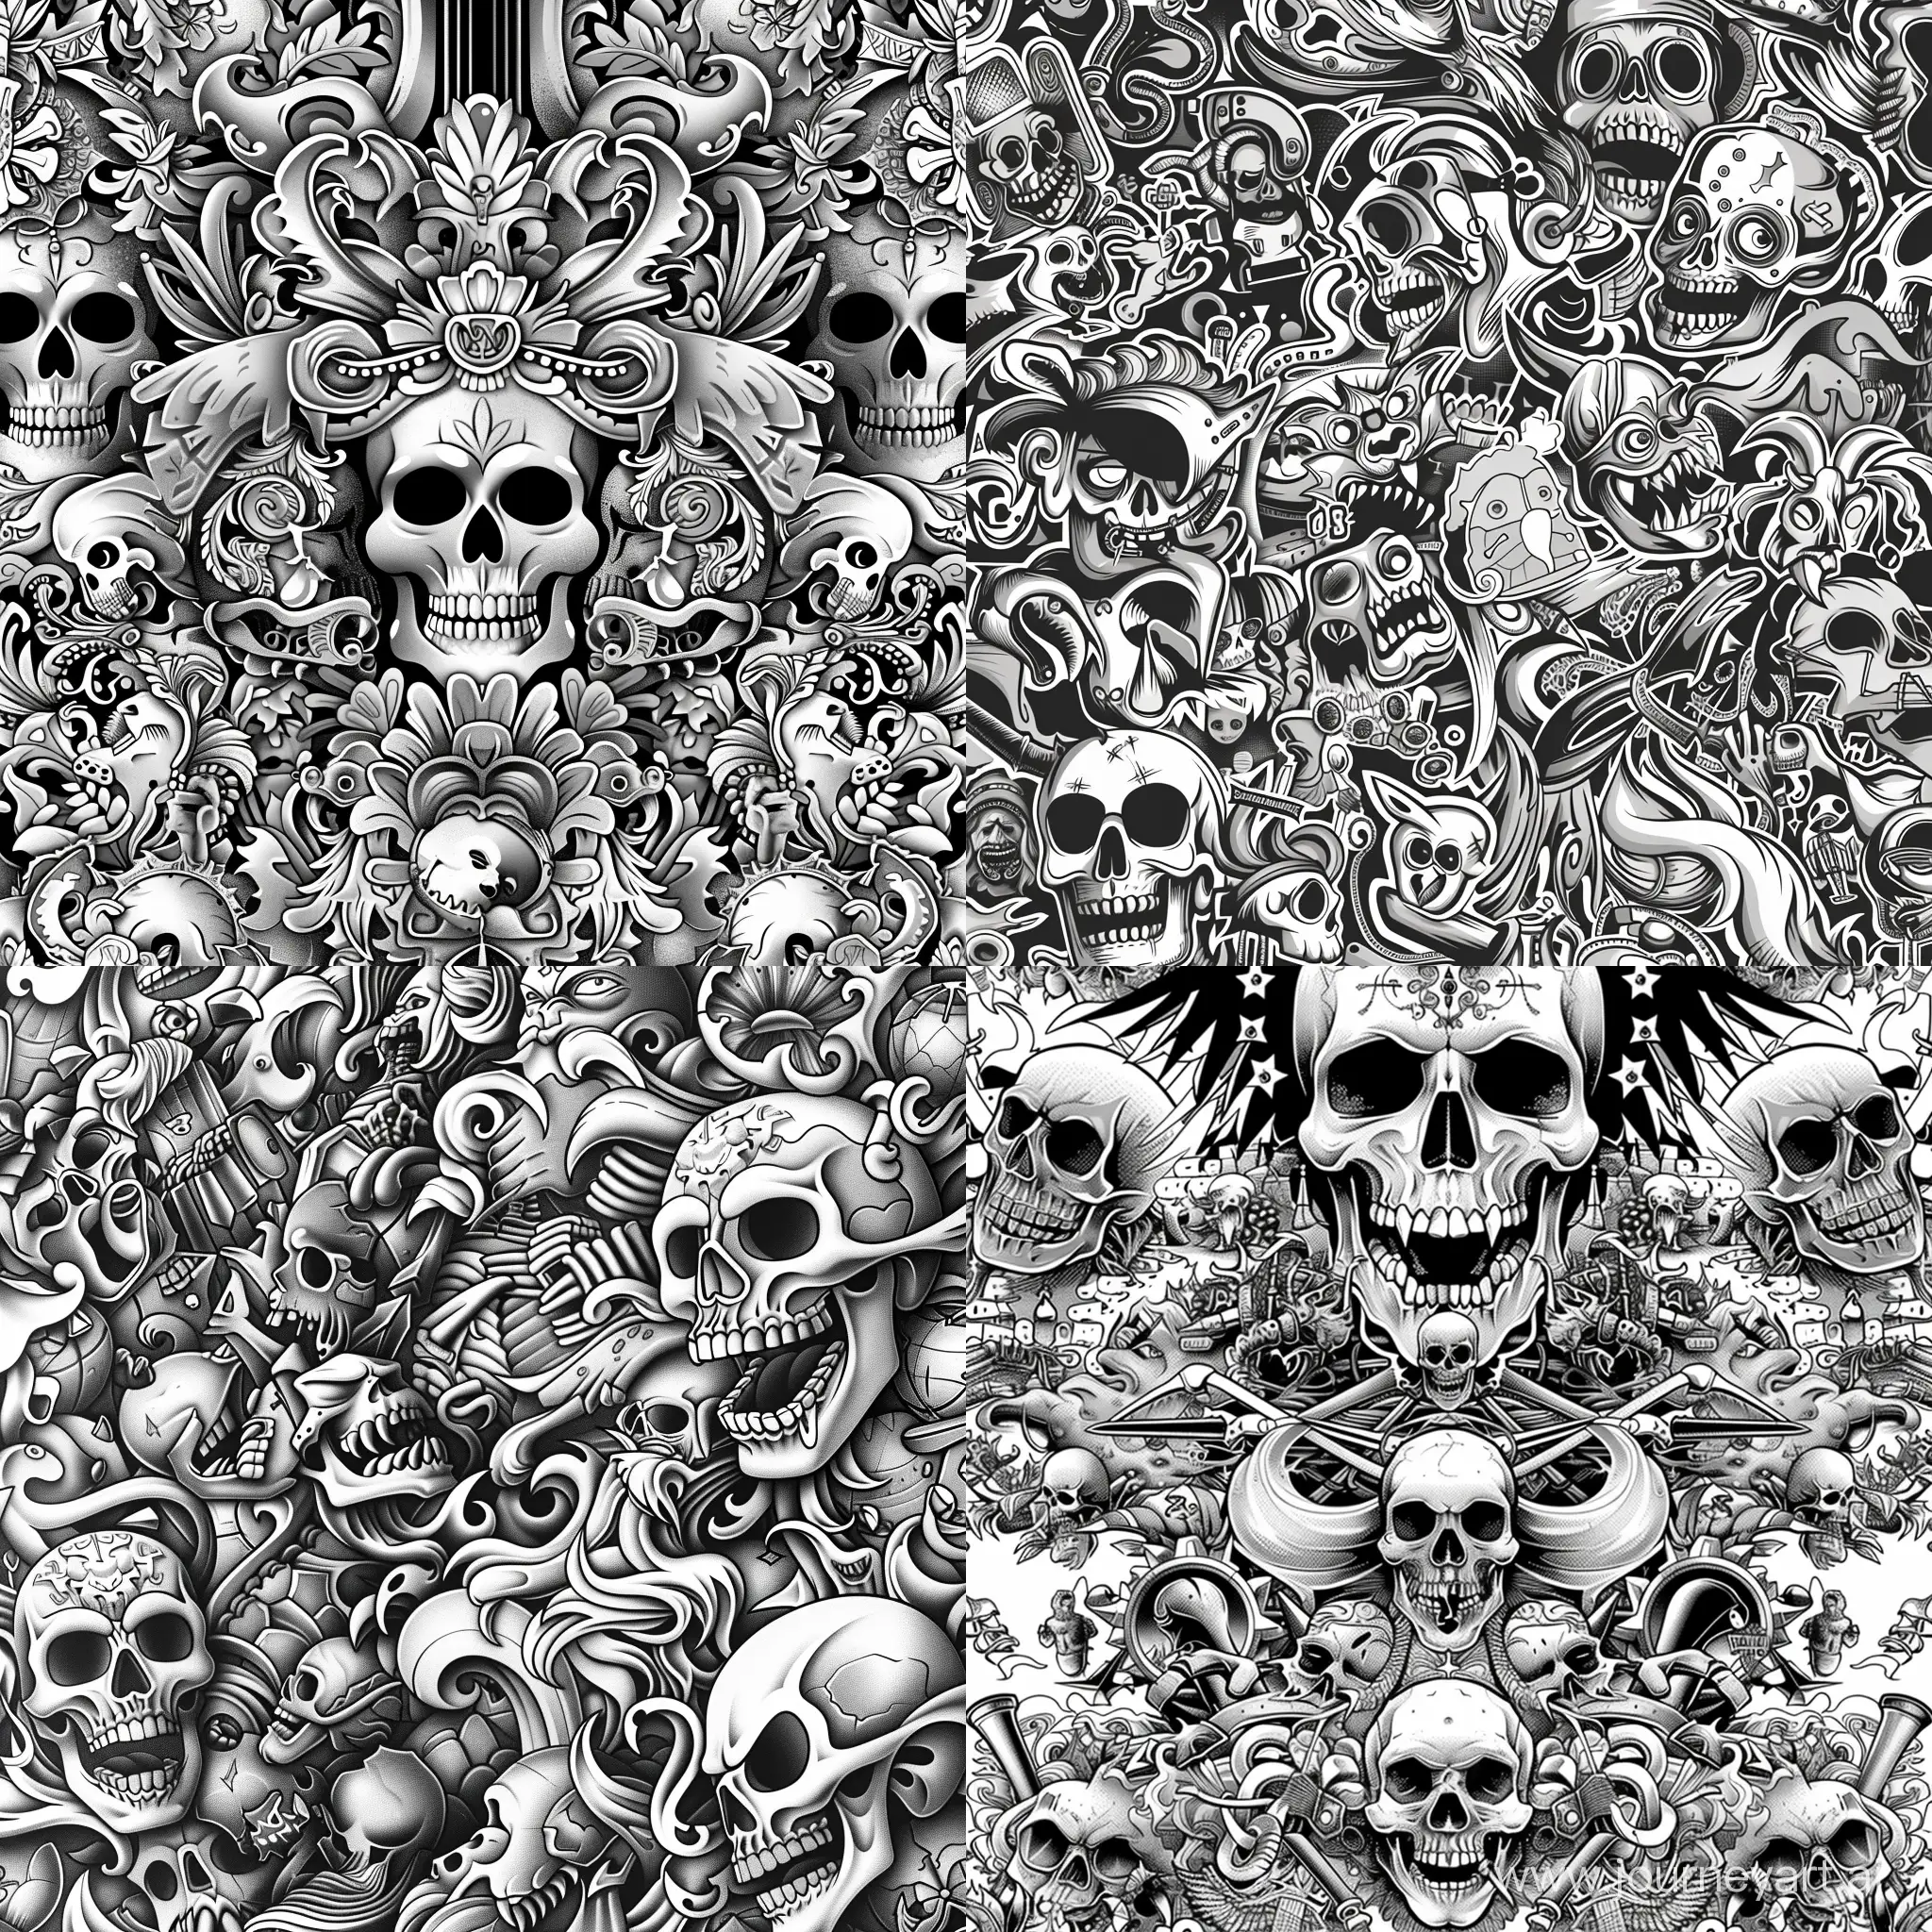 Sticker bomb style design in greyscale with a theme of heavy metal bands with very intricate details and a design that does not repeat itself with the overall appearance of a pattern you might find in a nature